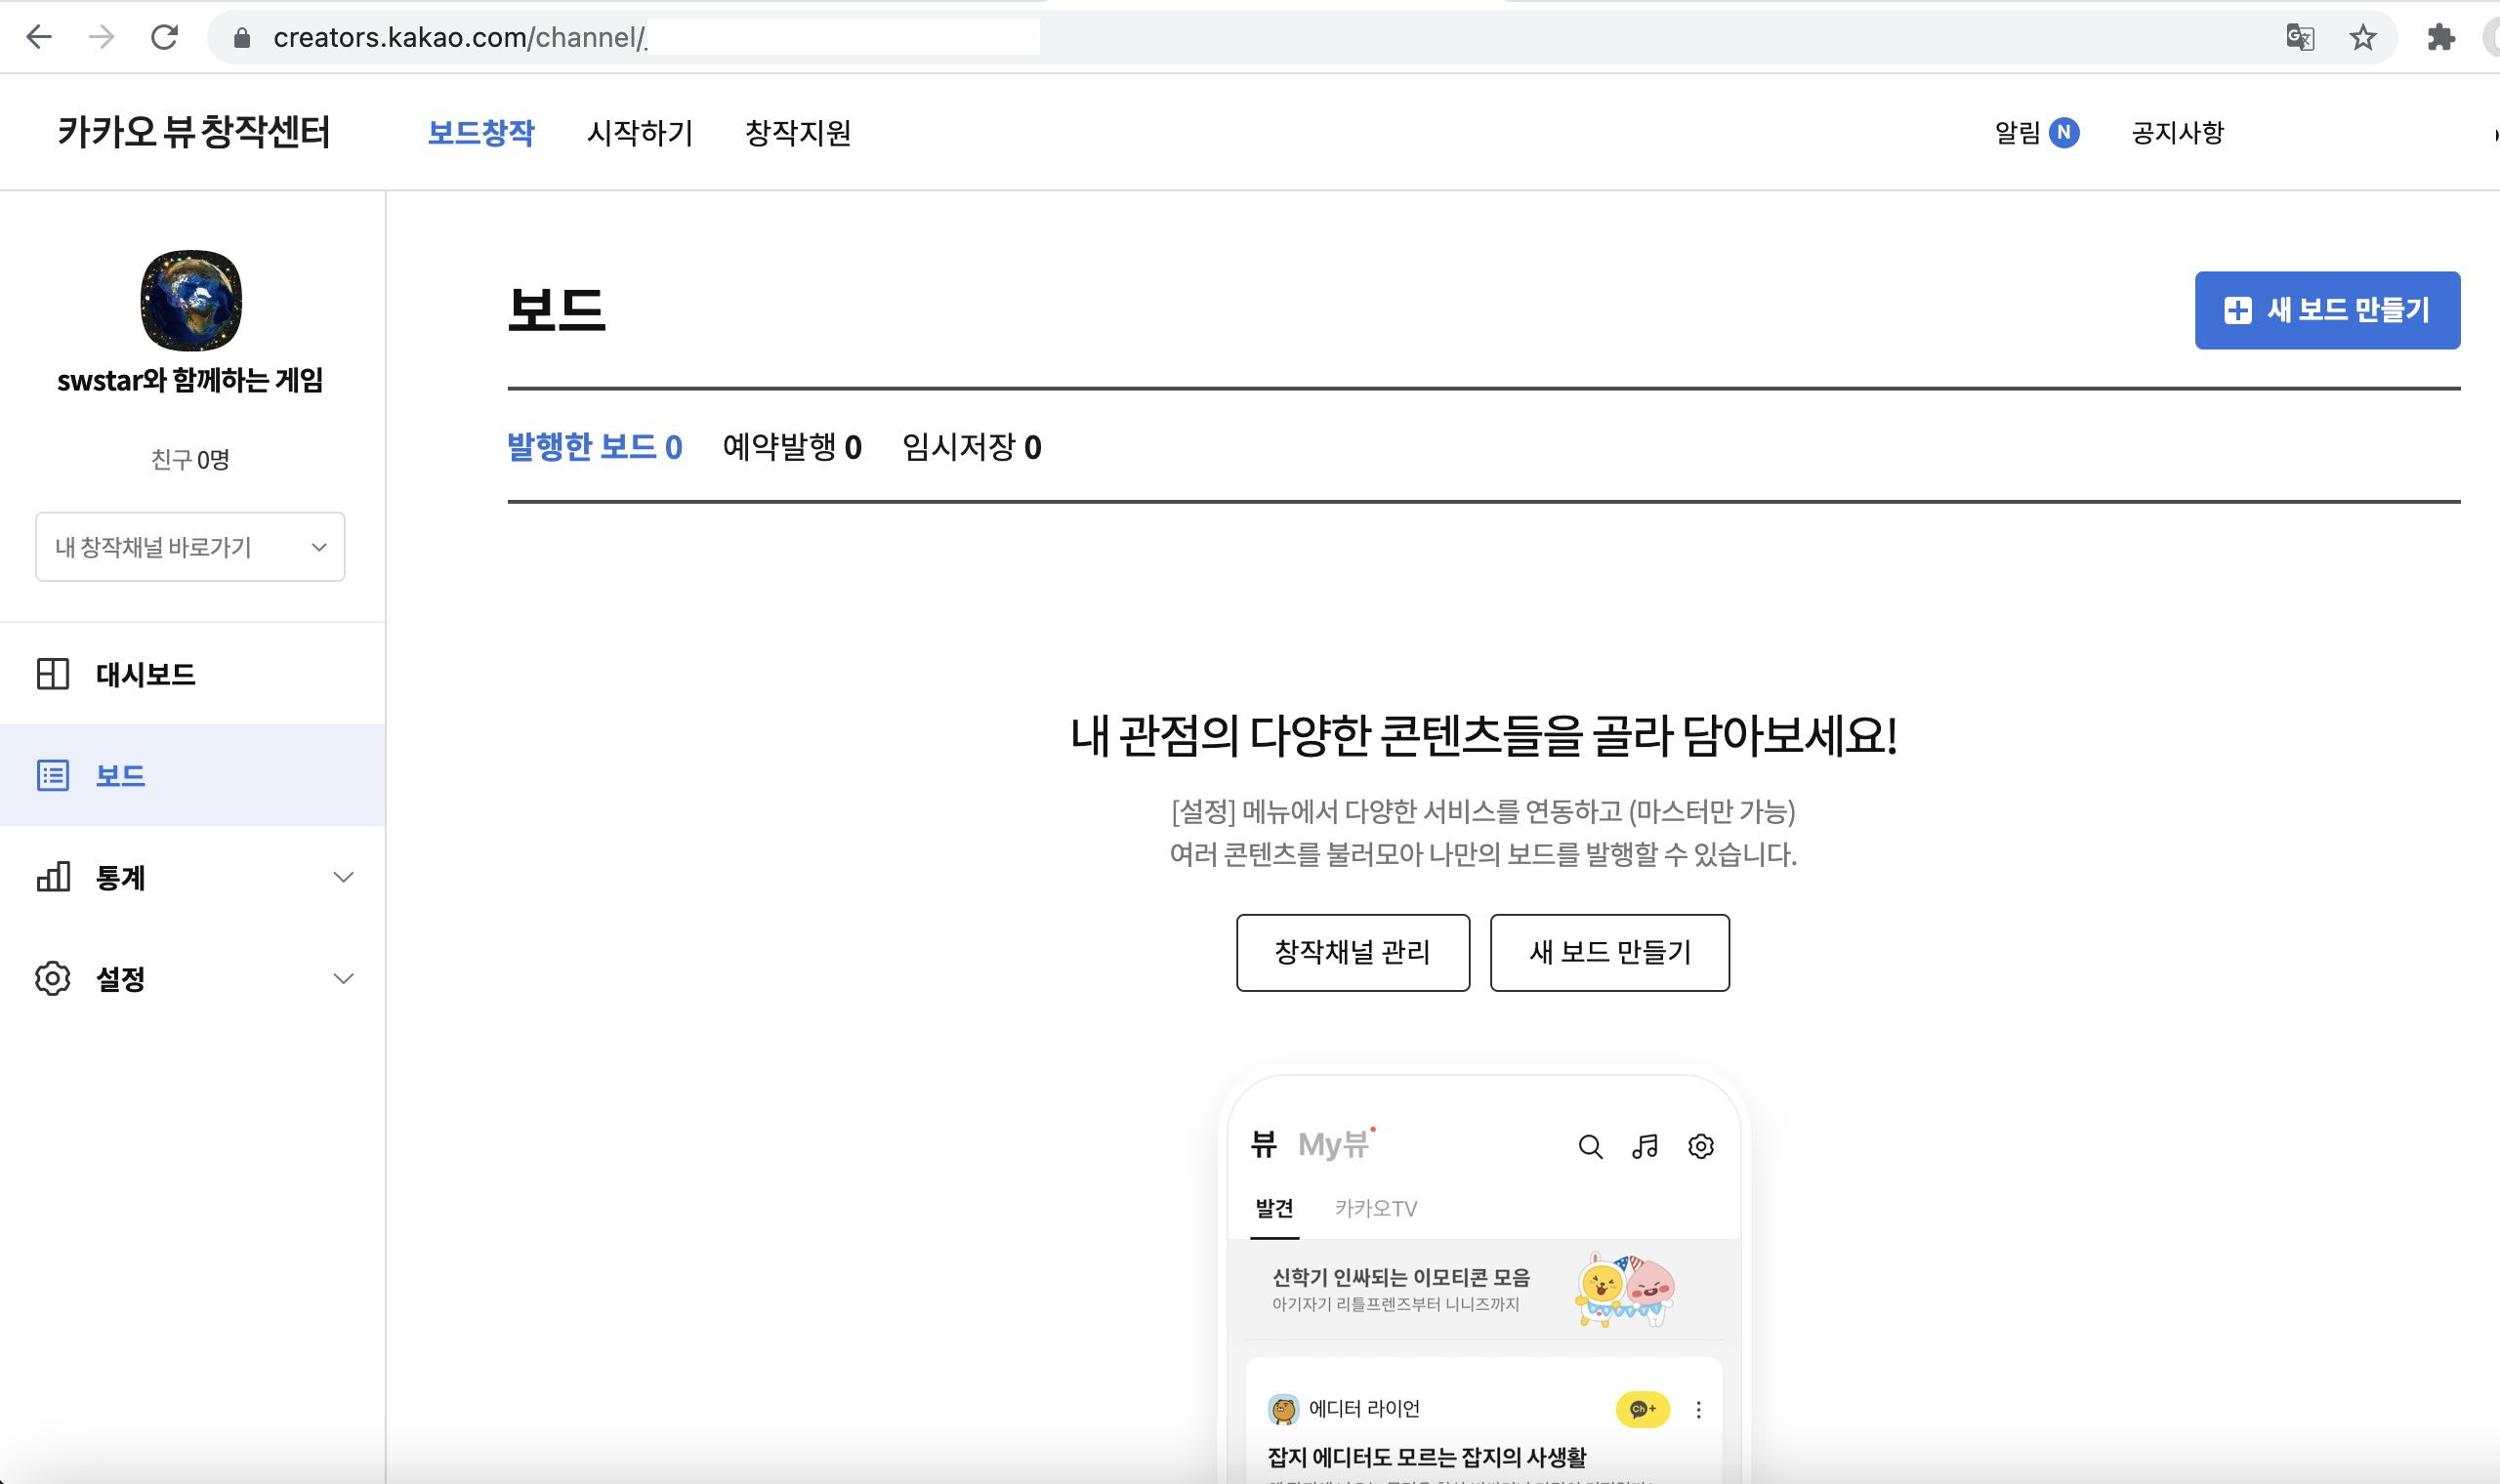 screenshot of Kakao View creation center, showing dashboard of the given channels